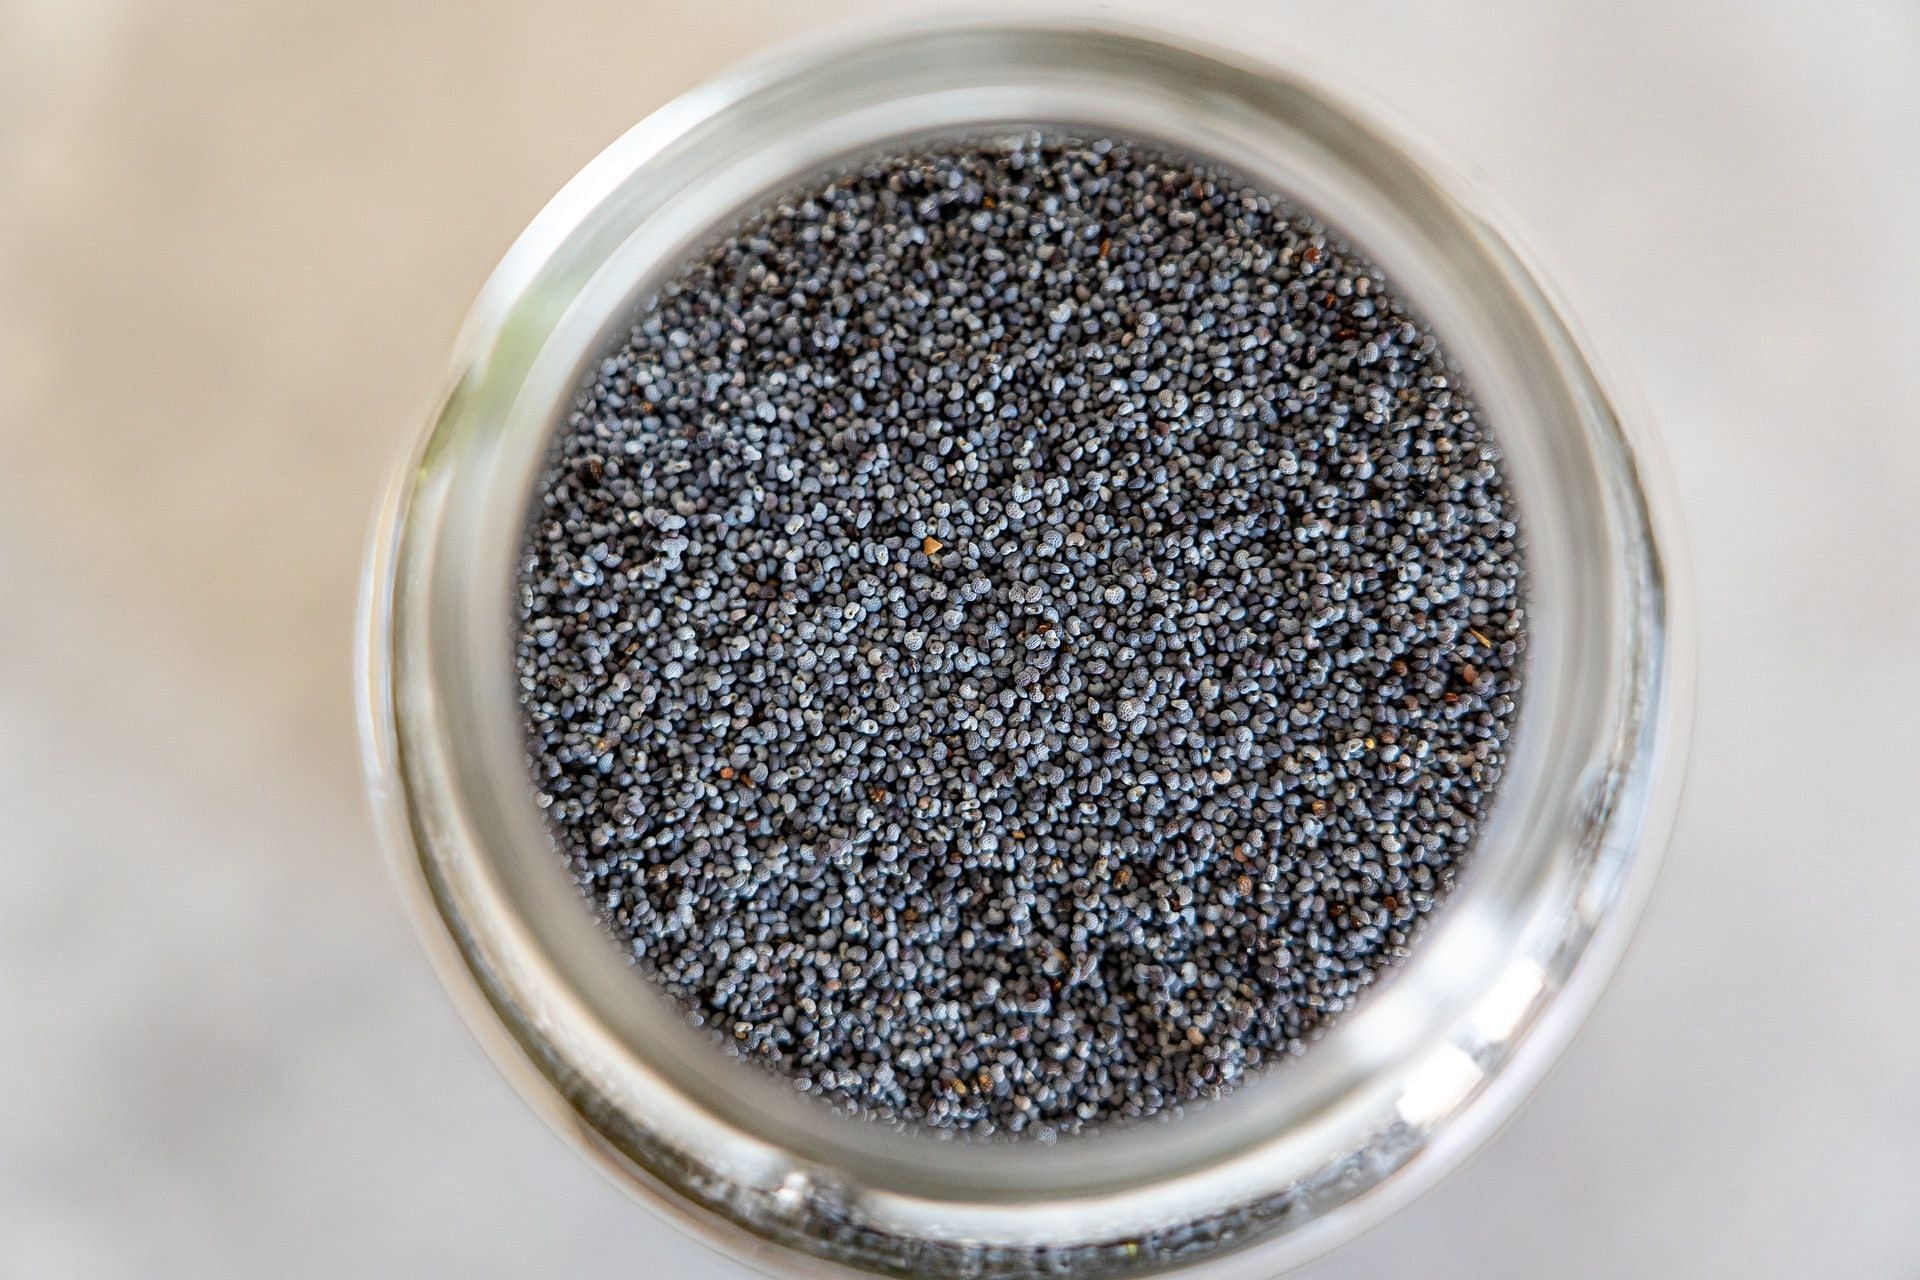 Regular chia seed consumption can be beneficial for your skin (Image via Castorly Stock/pexels)